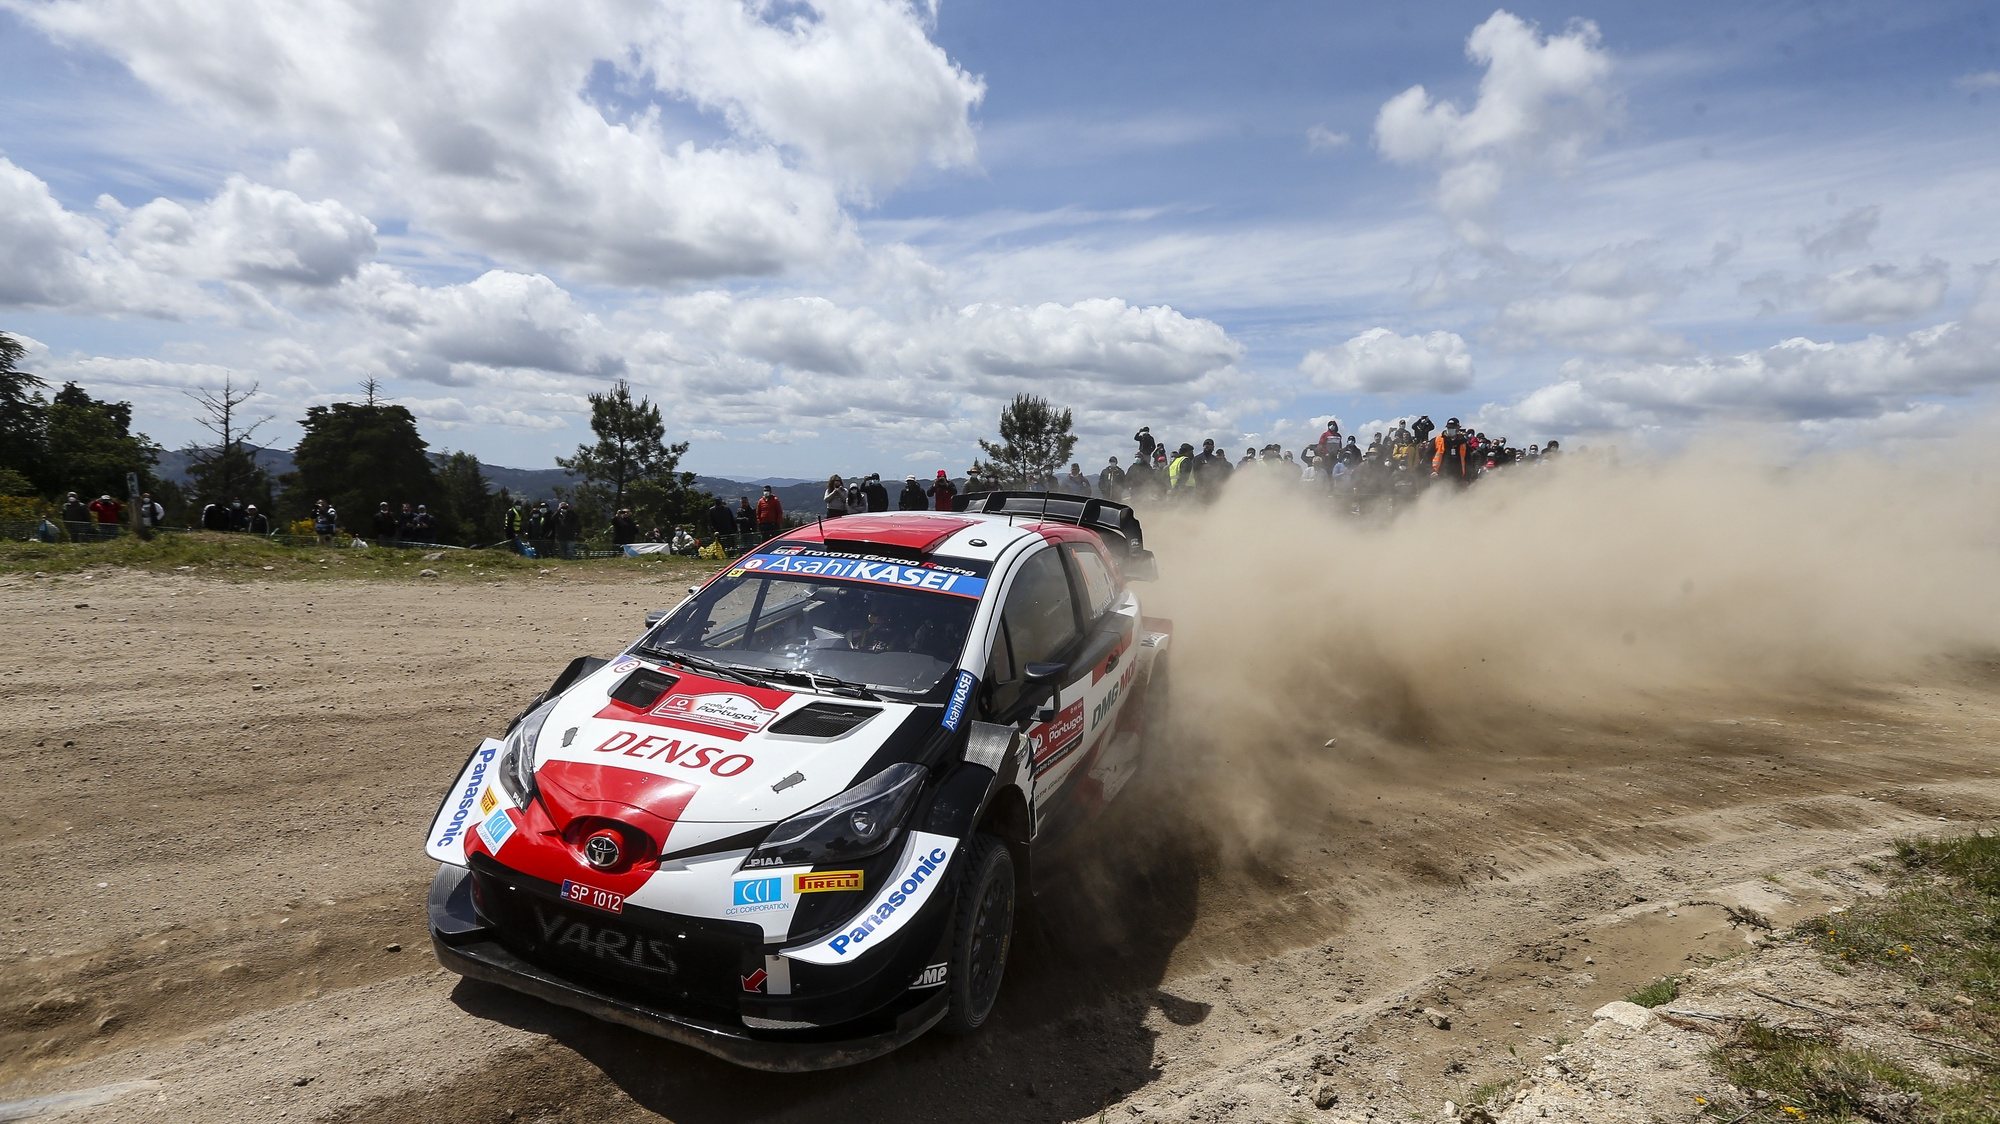 Sebastien Ogier from France drives his Toyota Yaris WRC during the second day of the Rally Portugal as part of the World Rally Championship (WRC), in Vieira do Minho, Portugal, 22 May 2021. JOSE COELHO/LUSA